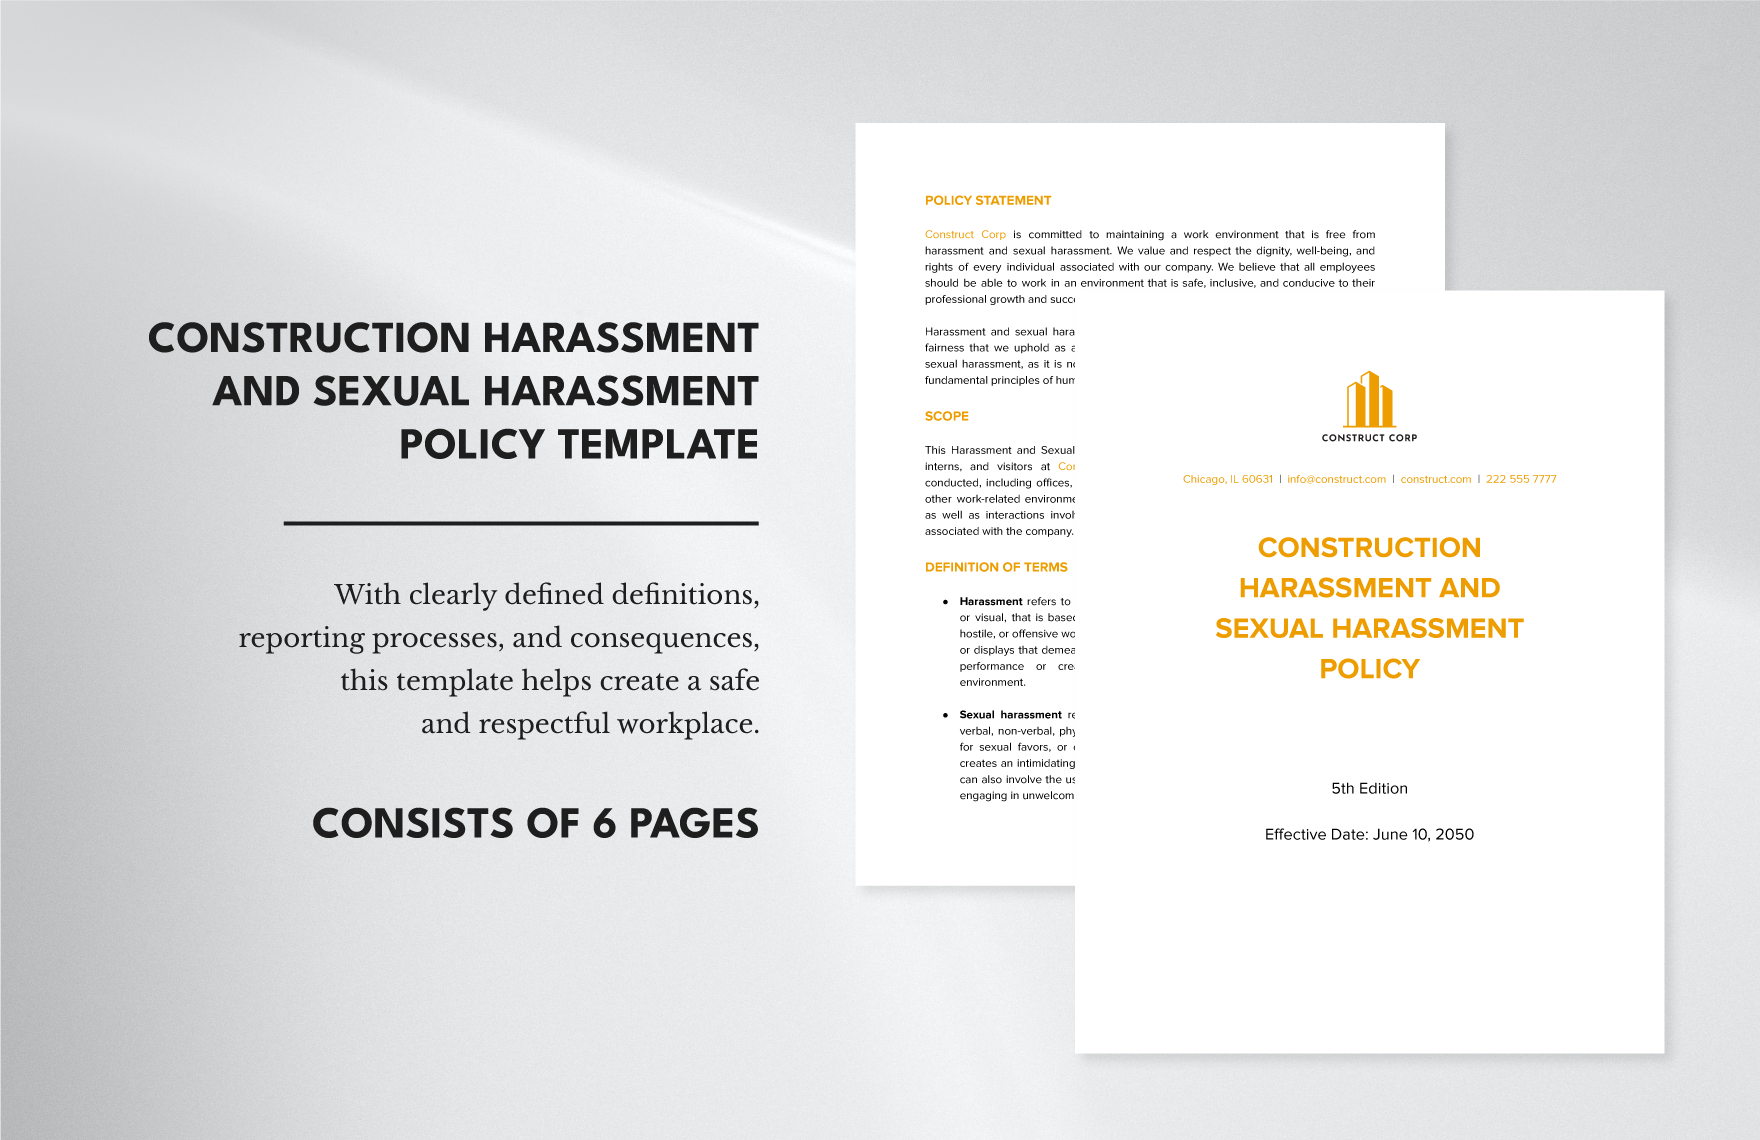 Construction Harassment and Sexual Harassment Policy Template in Word, Google Docs